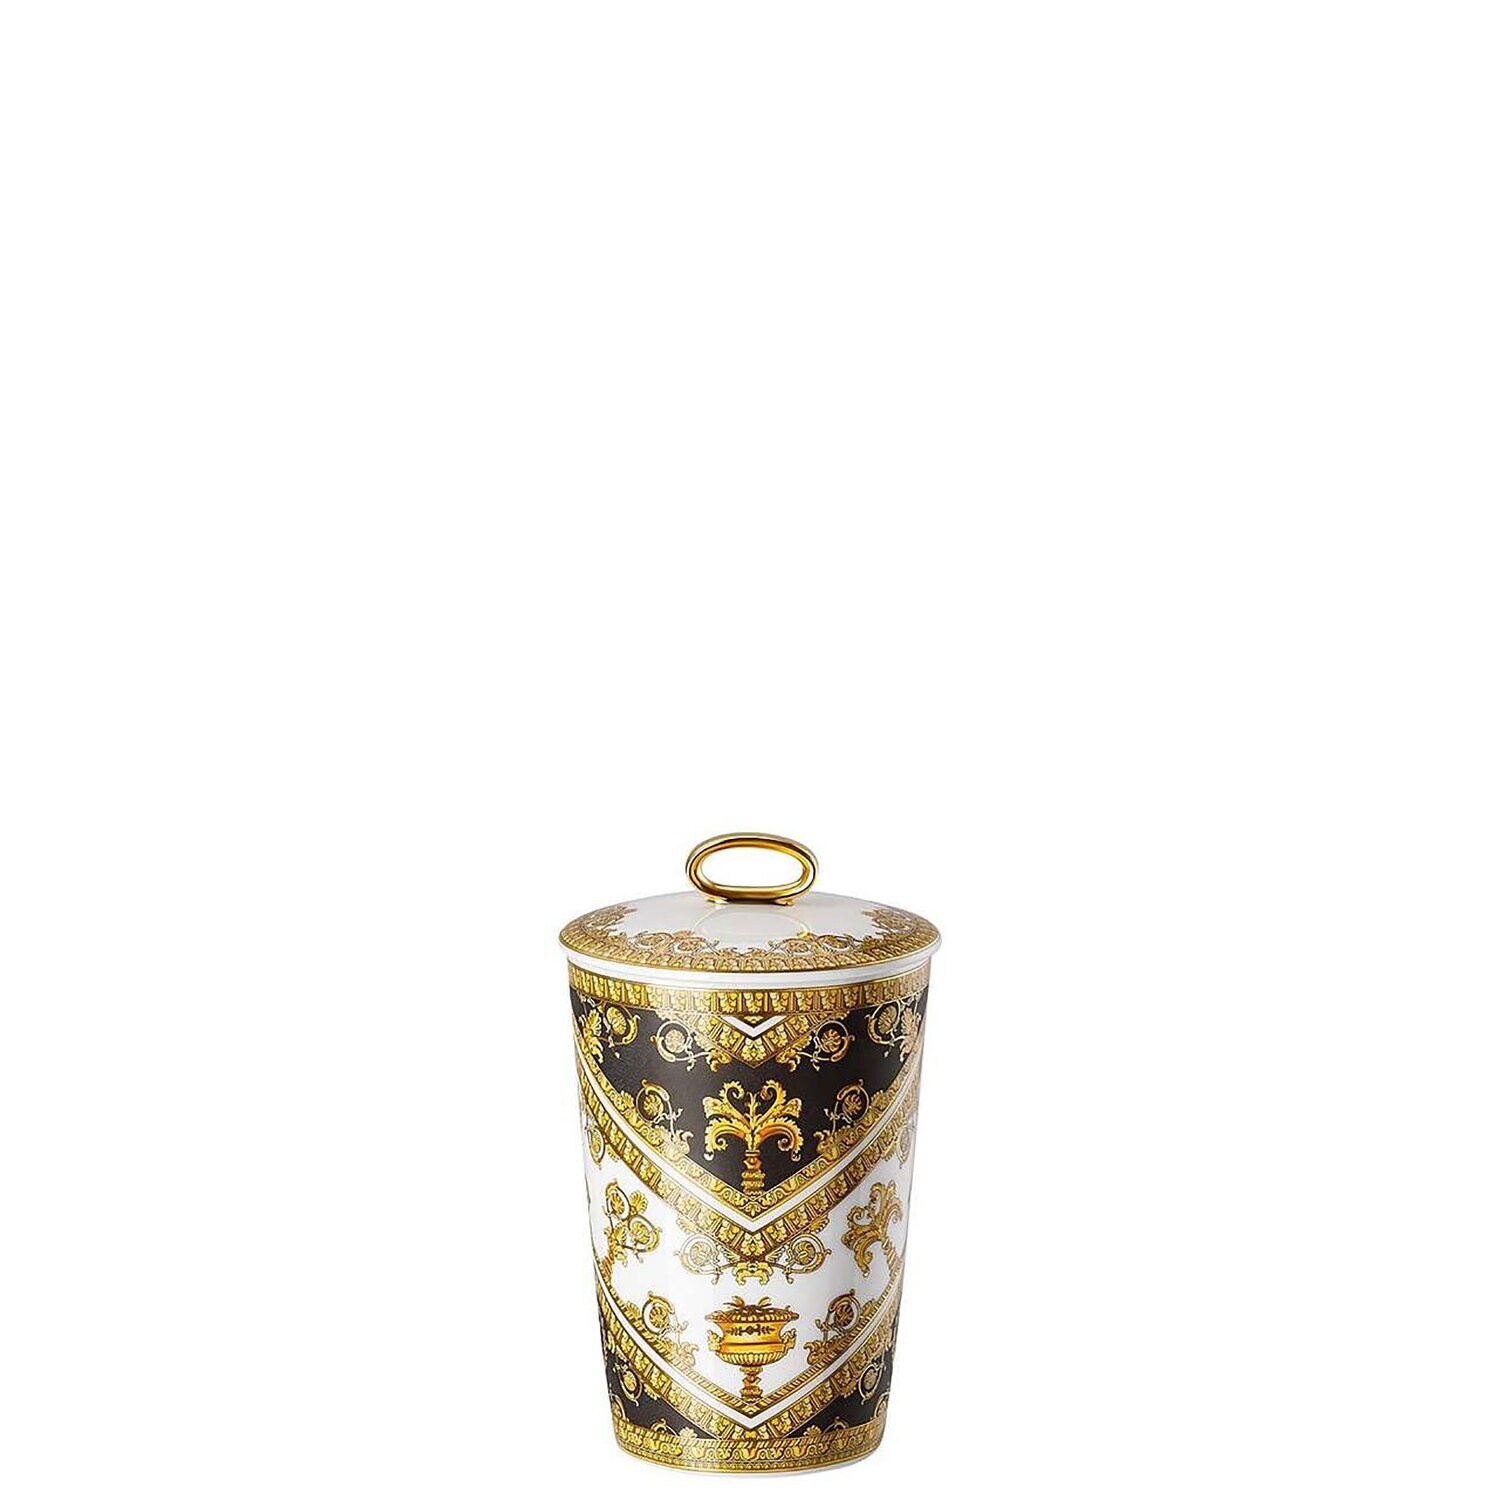 Versace I Love Baroque Scented Votive Candle with Lid 5 1/2 Inch